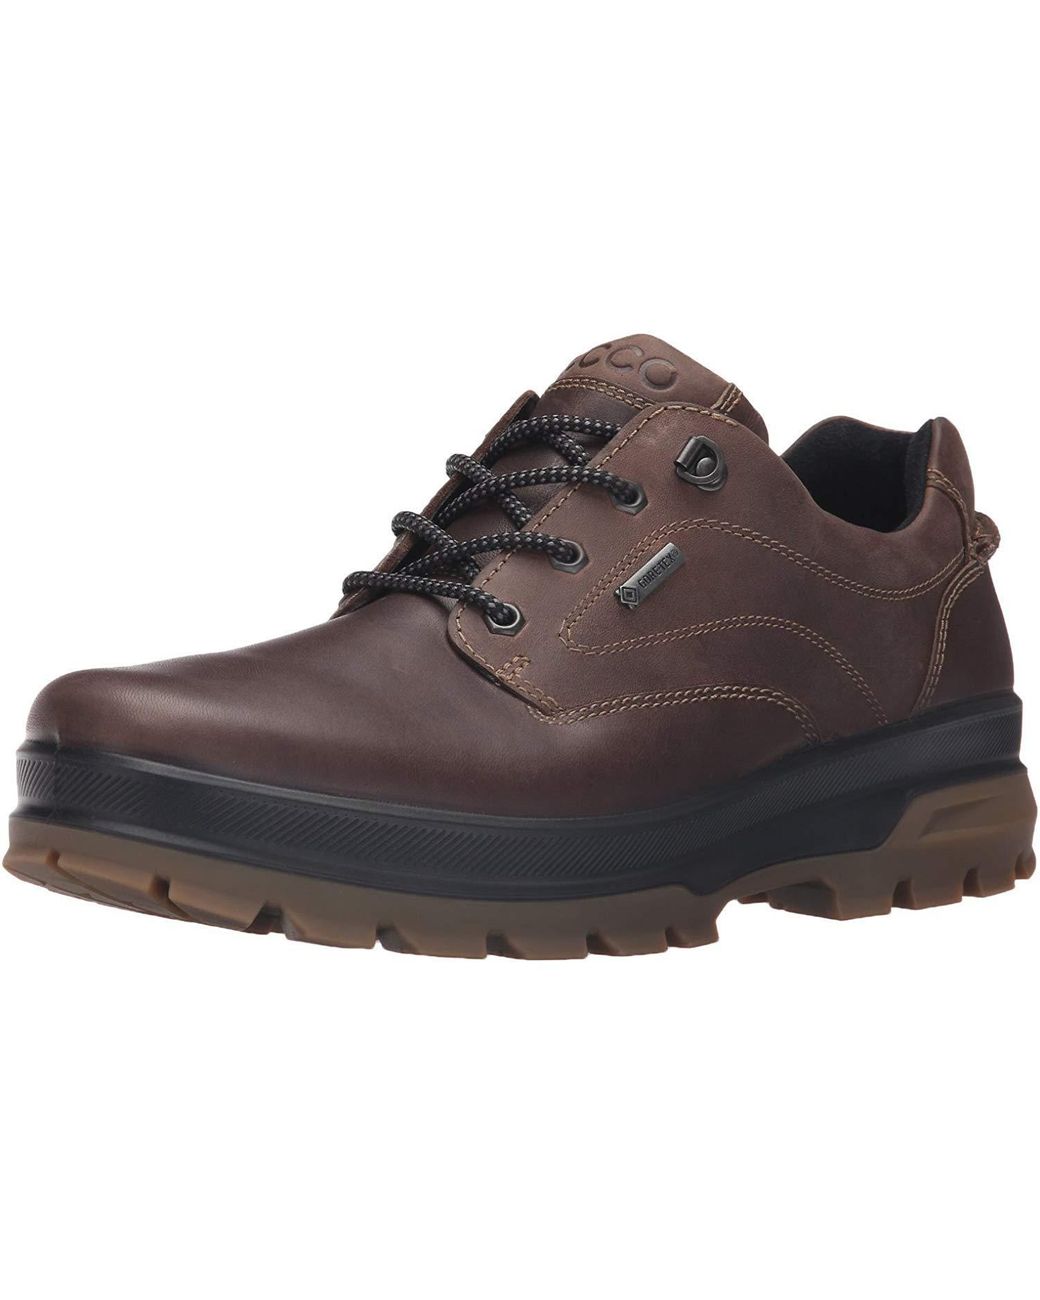 Ecco Leather RUGGED Track Hiking Boots in Dark Clay/Coffee (Brown) for Men  | Lyst